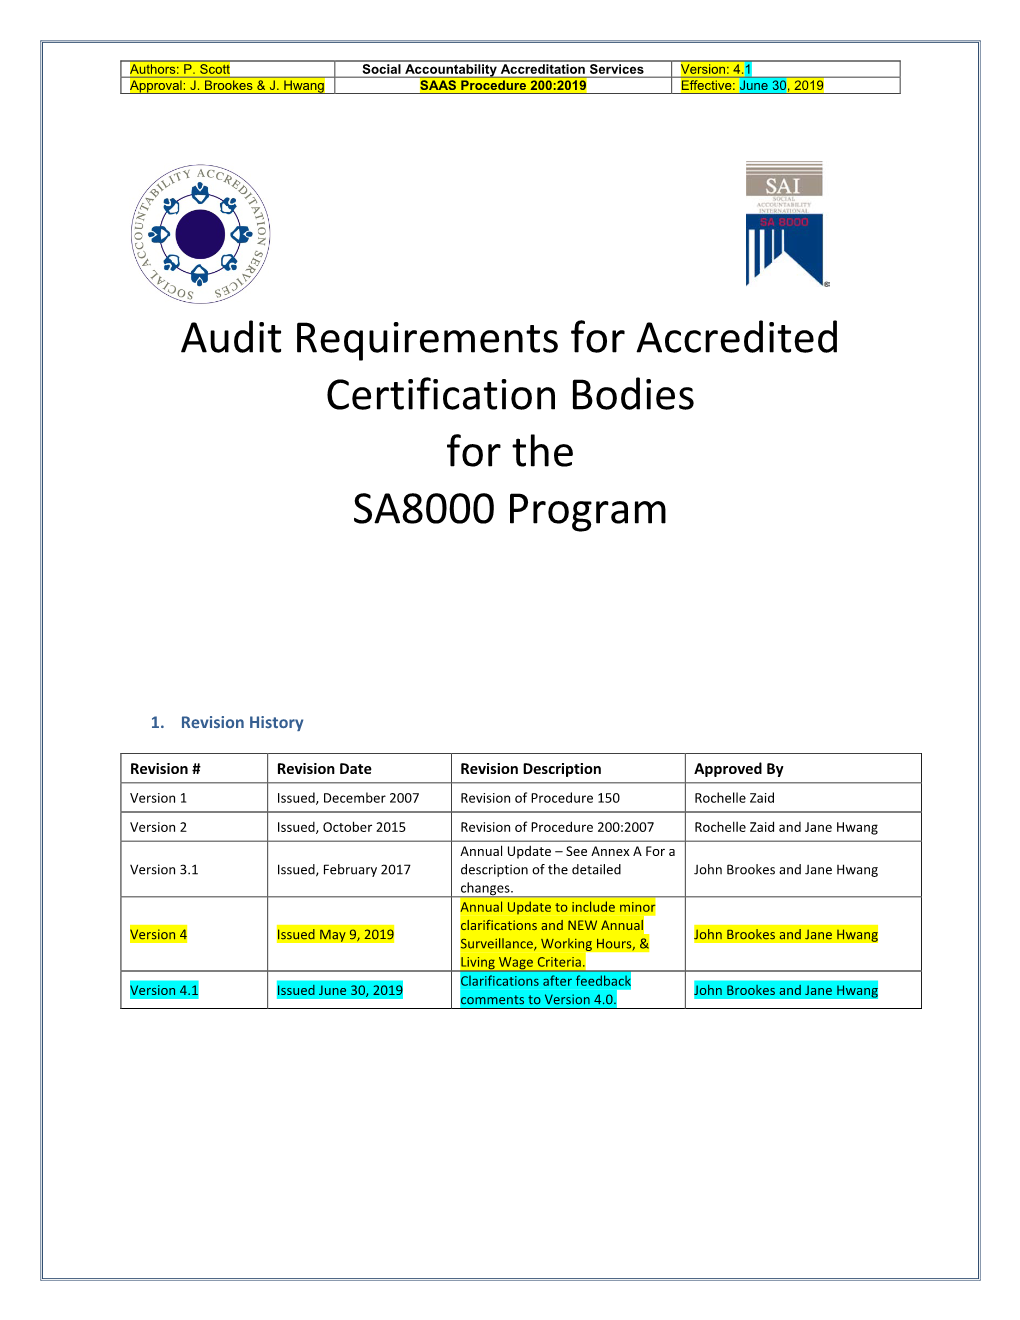 Audit Requirements for Accredited Certification Bodies for the SA8000 Program